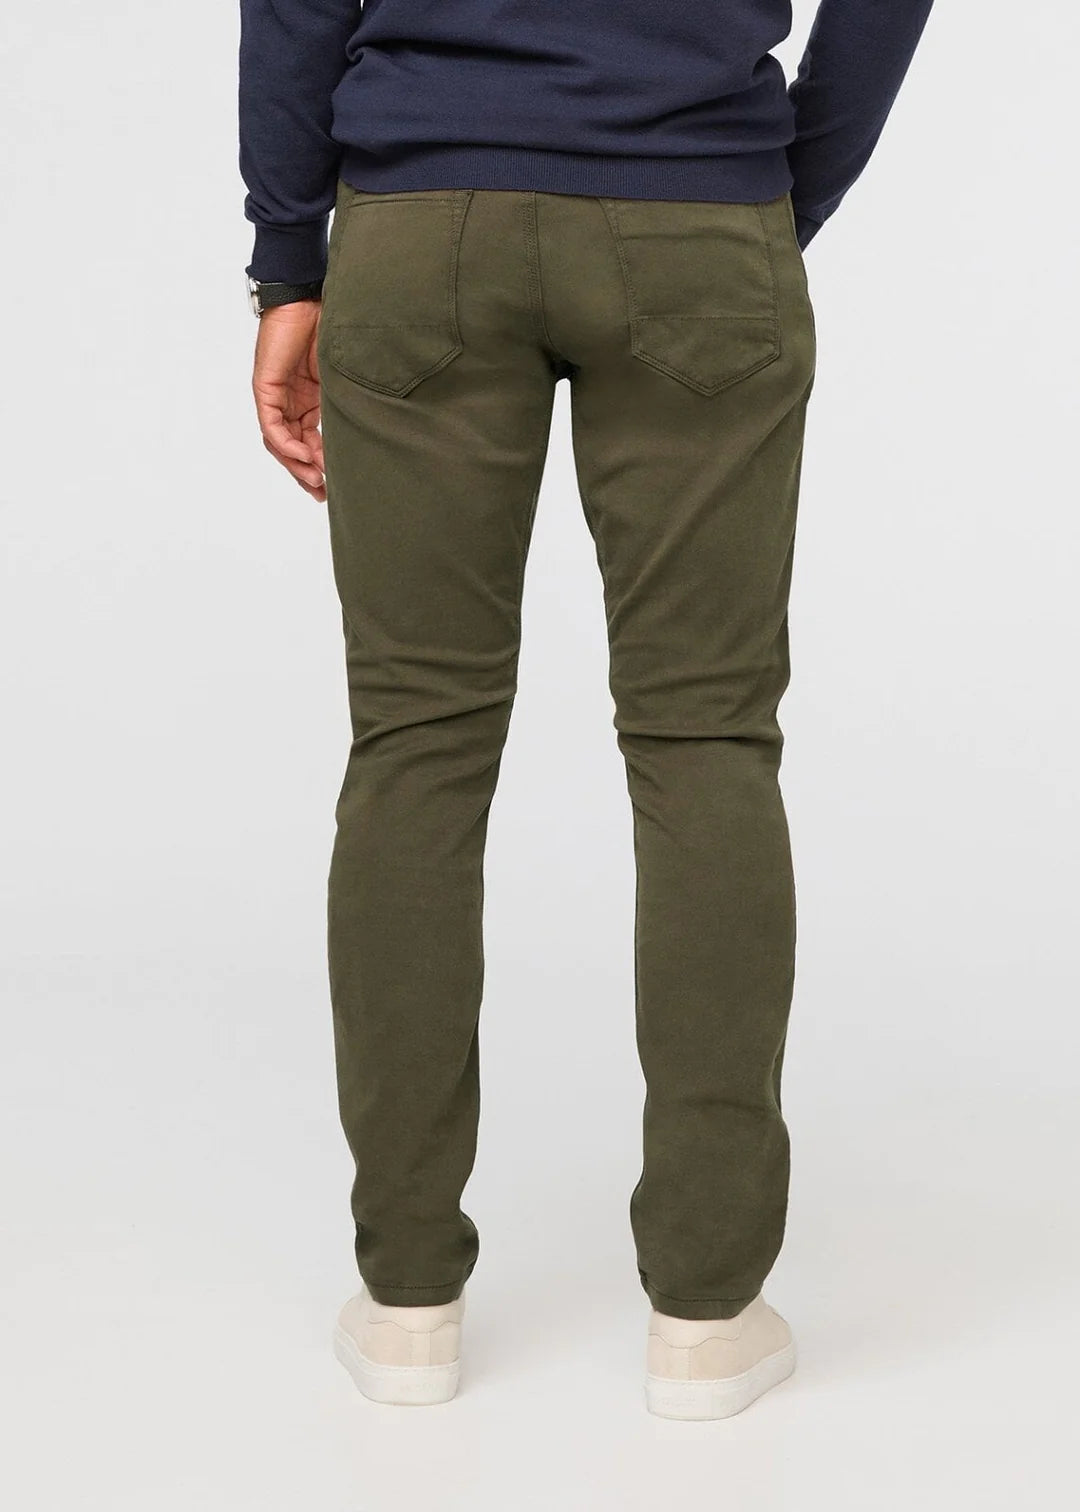 m bottoms - DUER - No Sweat Pant Relaxed Taper - PLENTY